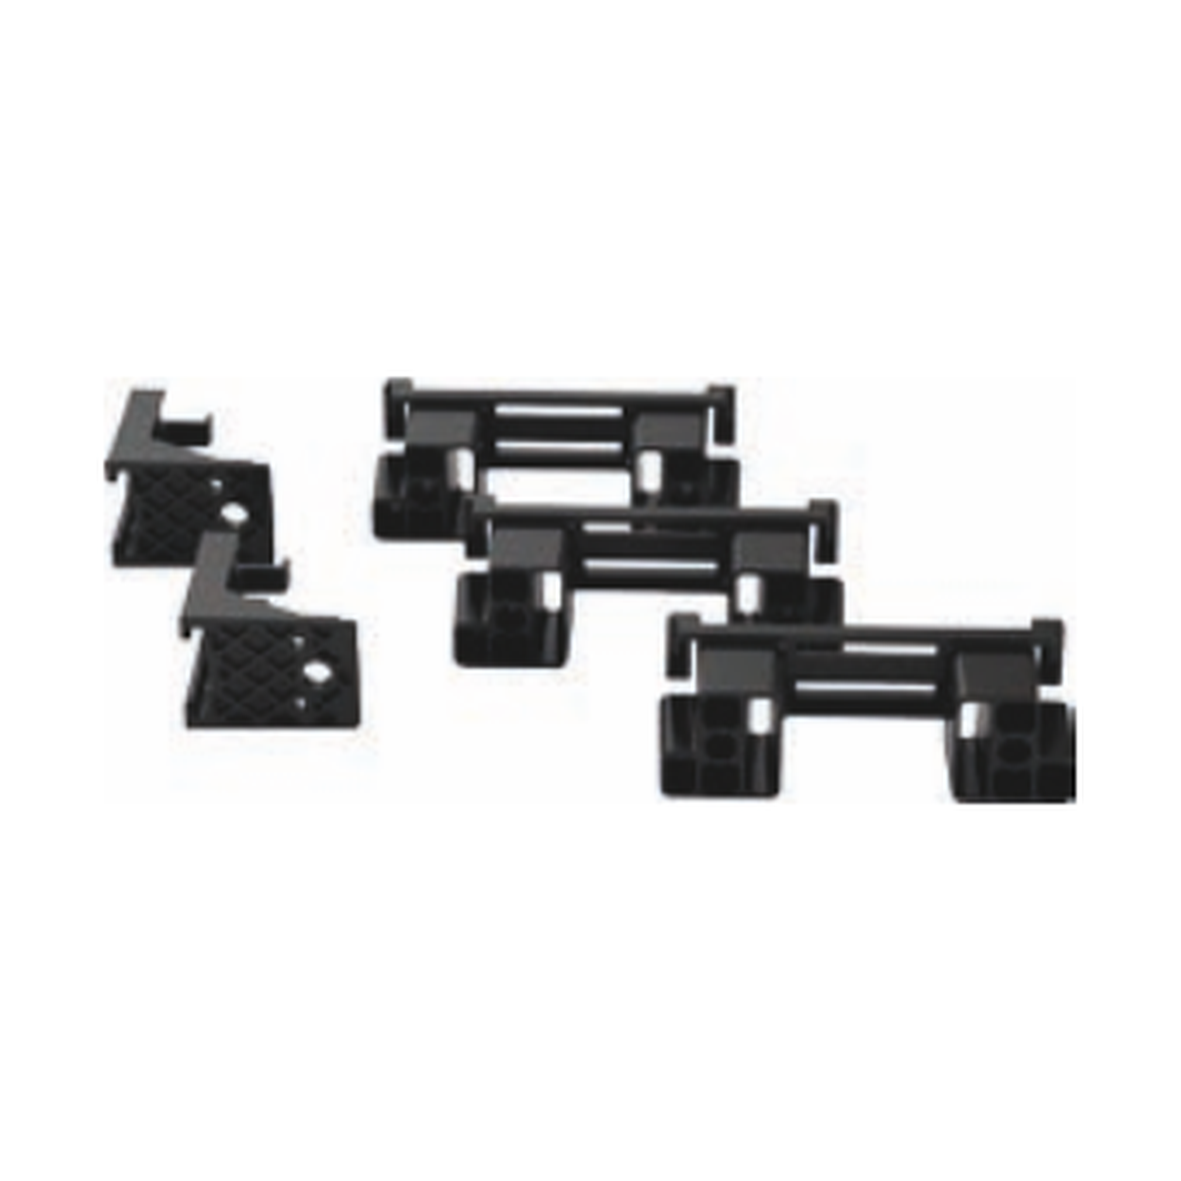 Kit brackets and spacers Verotti Low Level - VS0863860